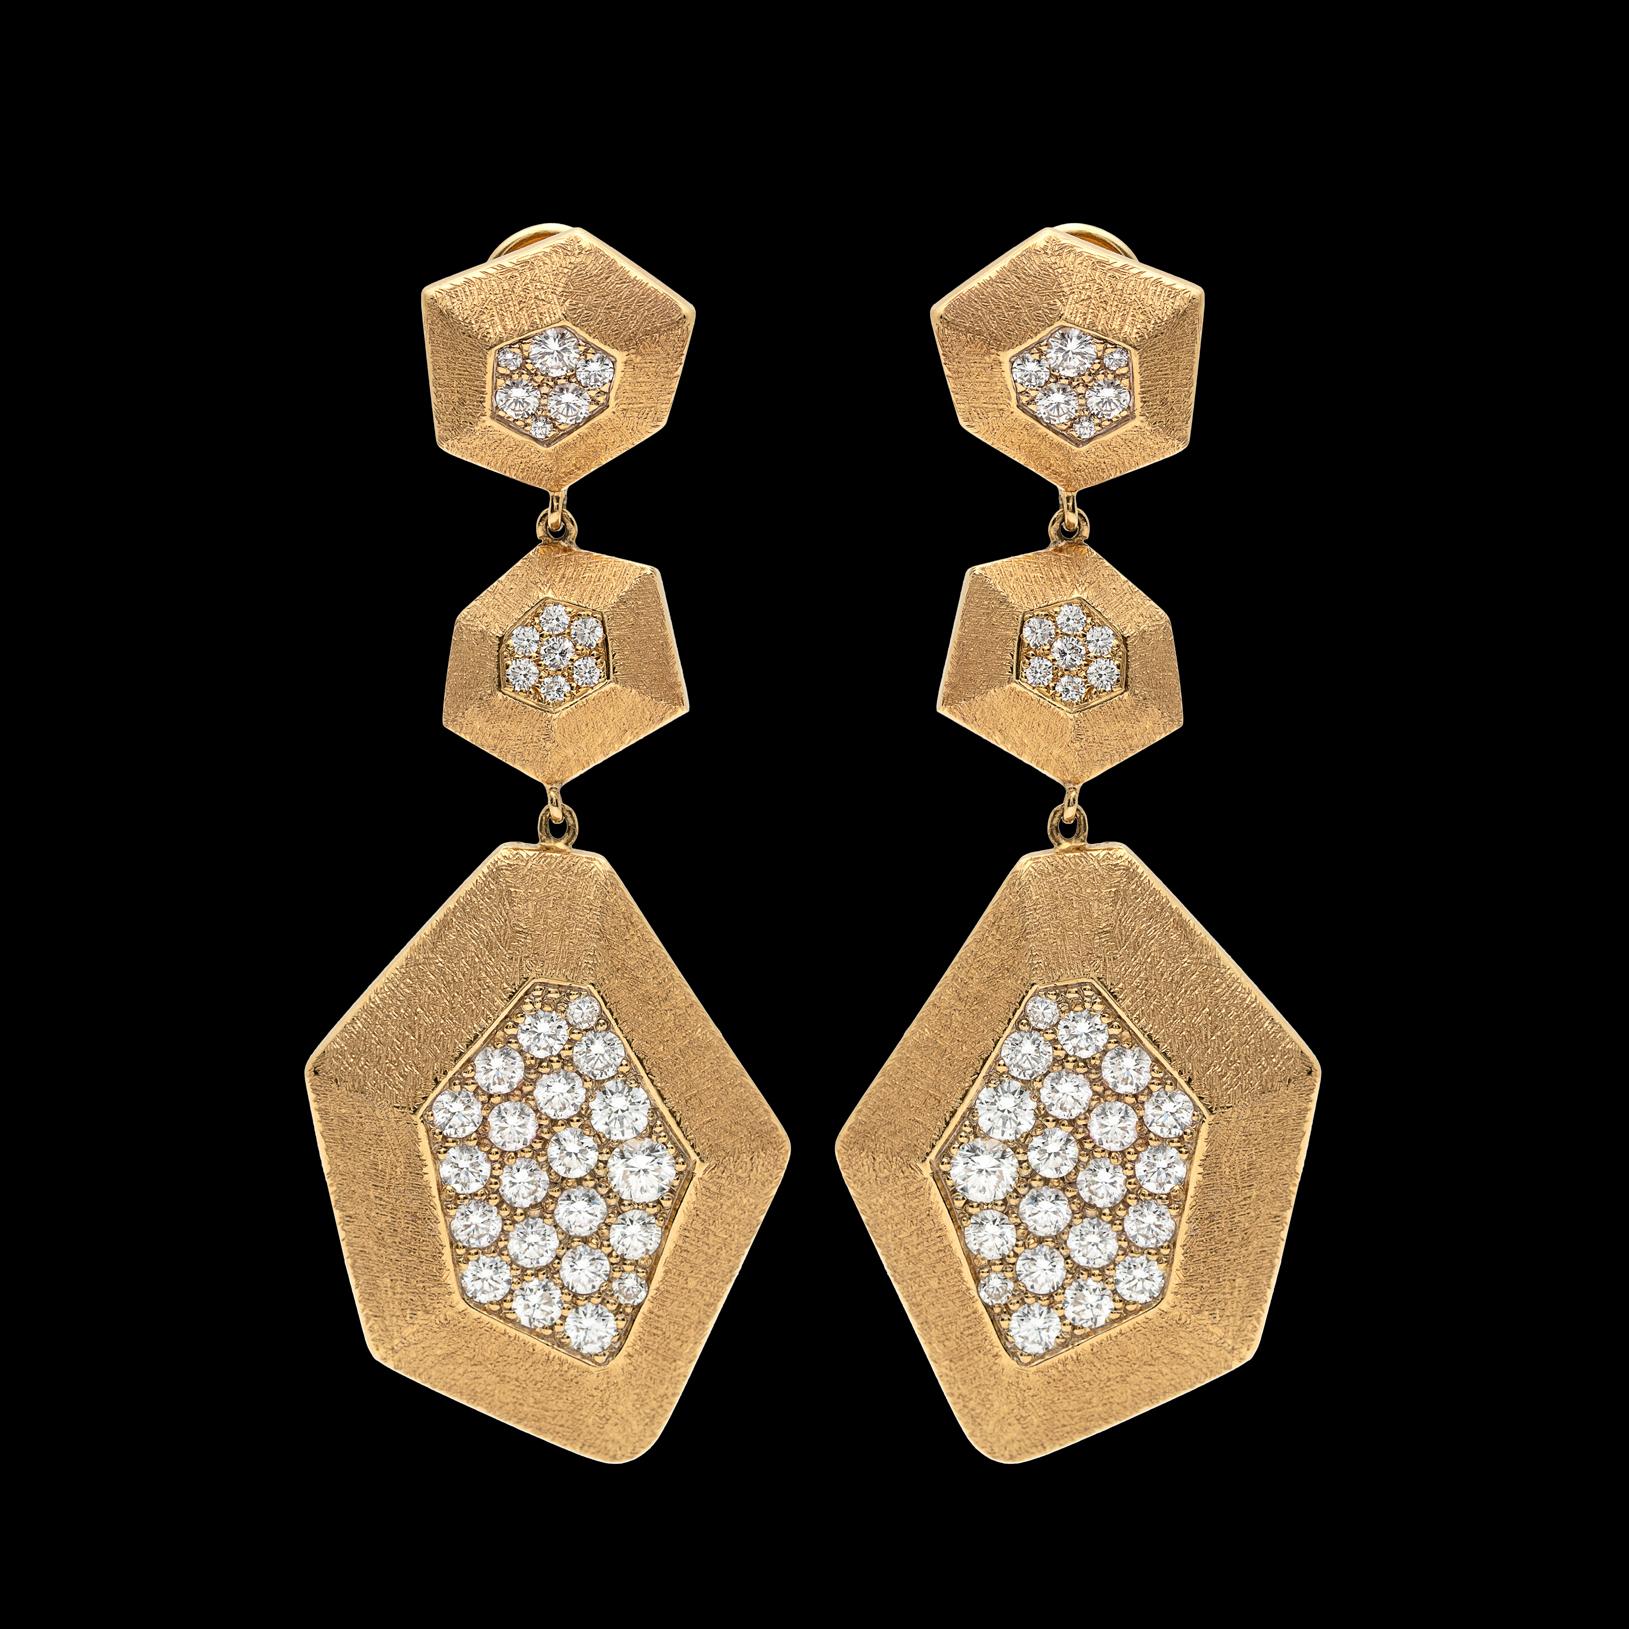 Round Cut Diamond and Gold Earrings by Mimi So